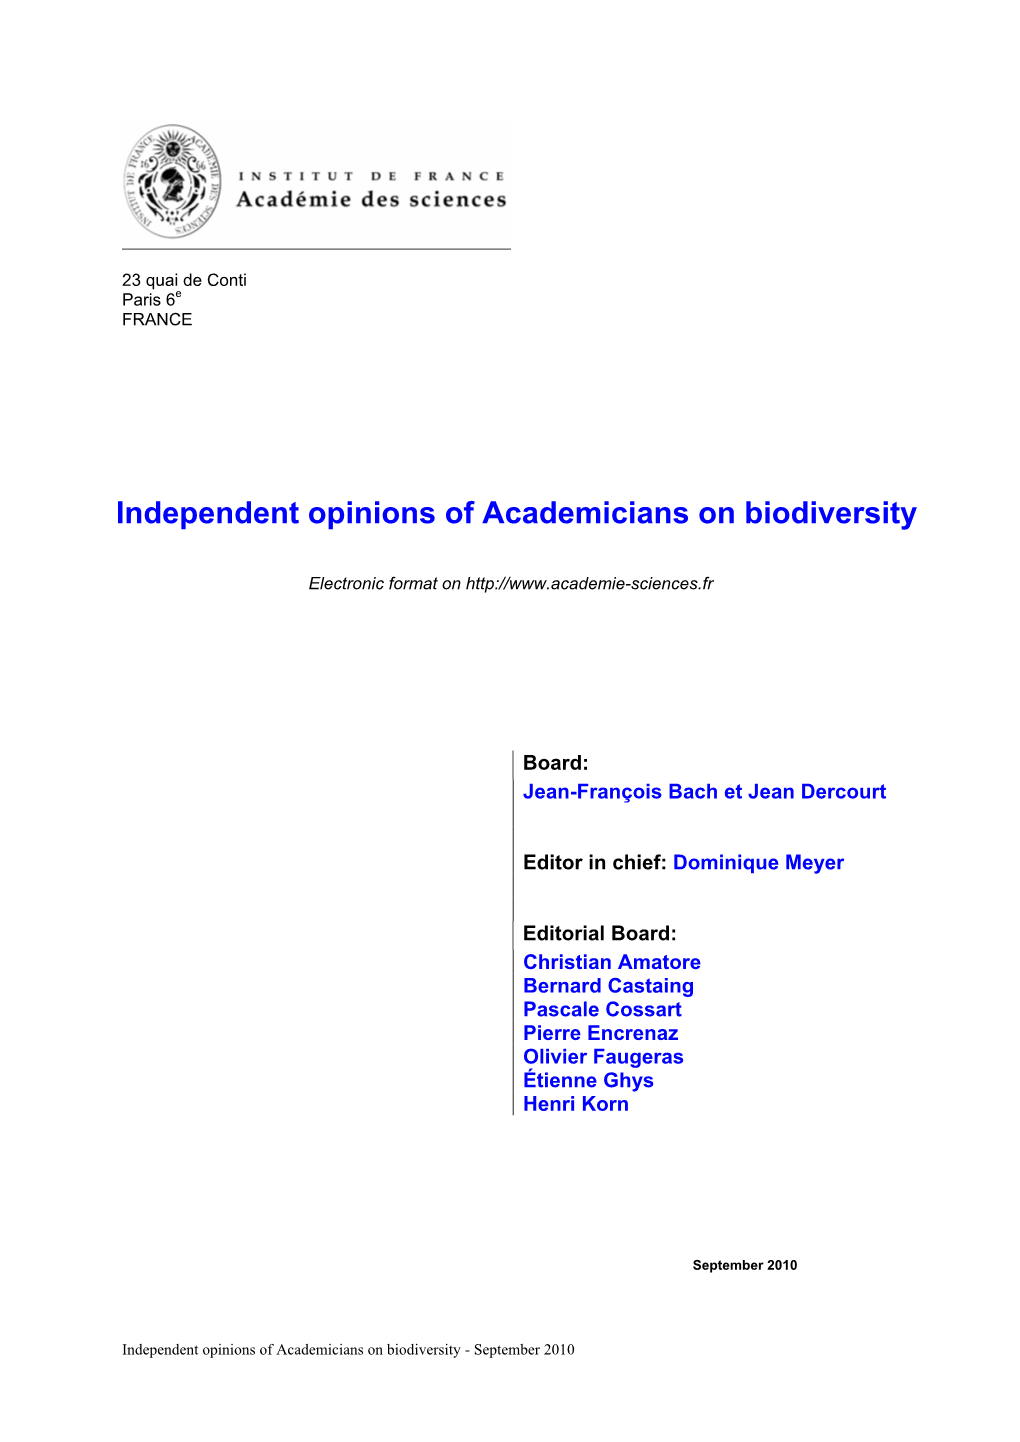 Independent Opinions of Academicians on Biodiversity